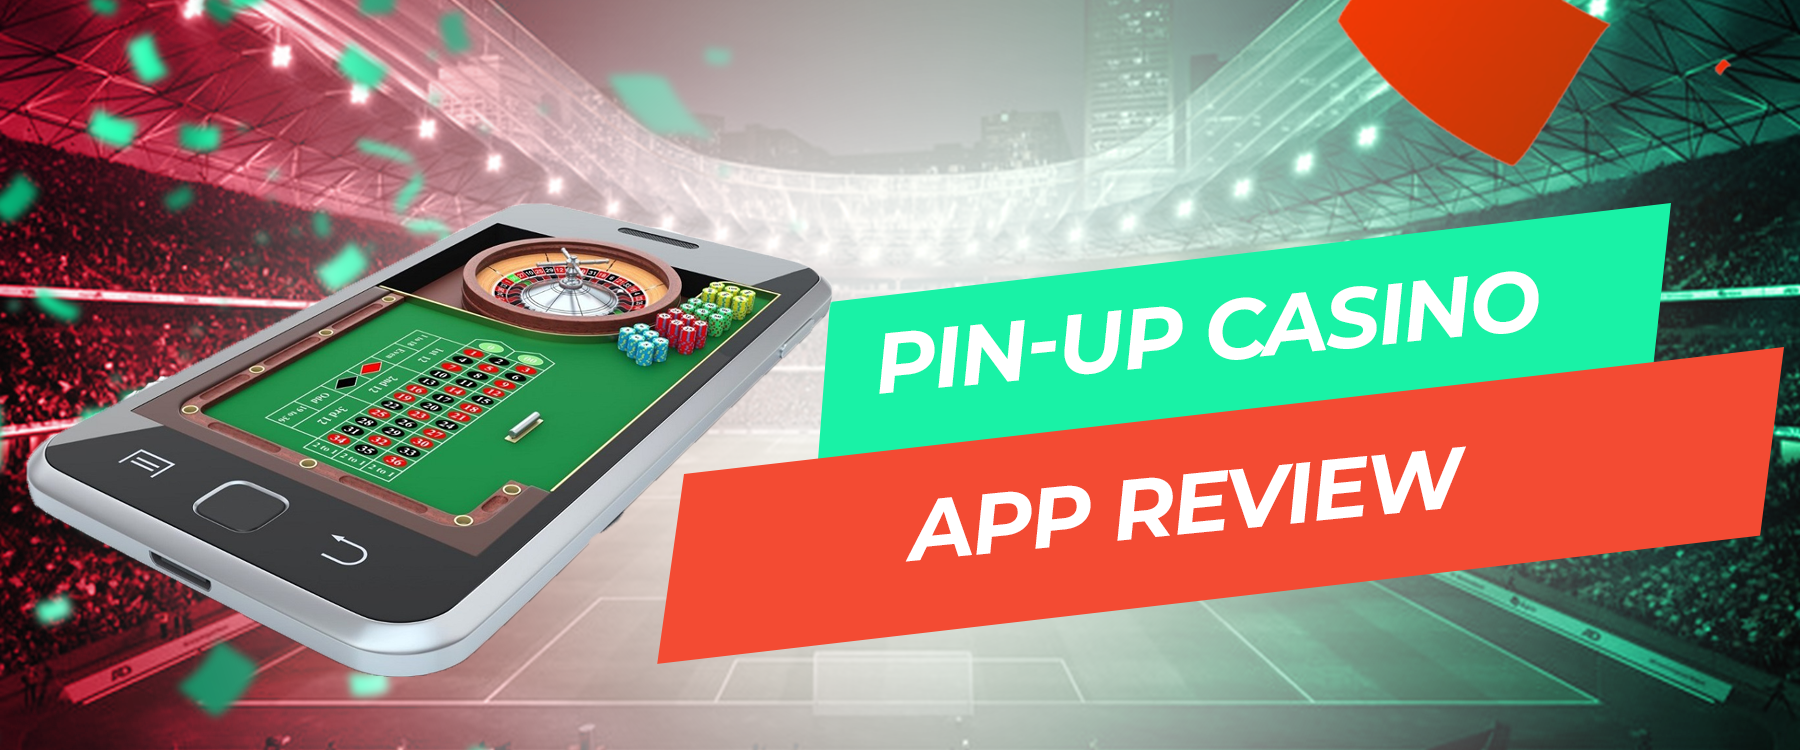 Pin-up Casino App: available mobile casinos